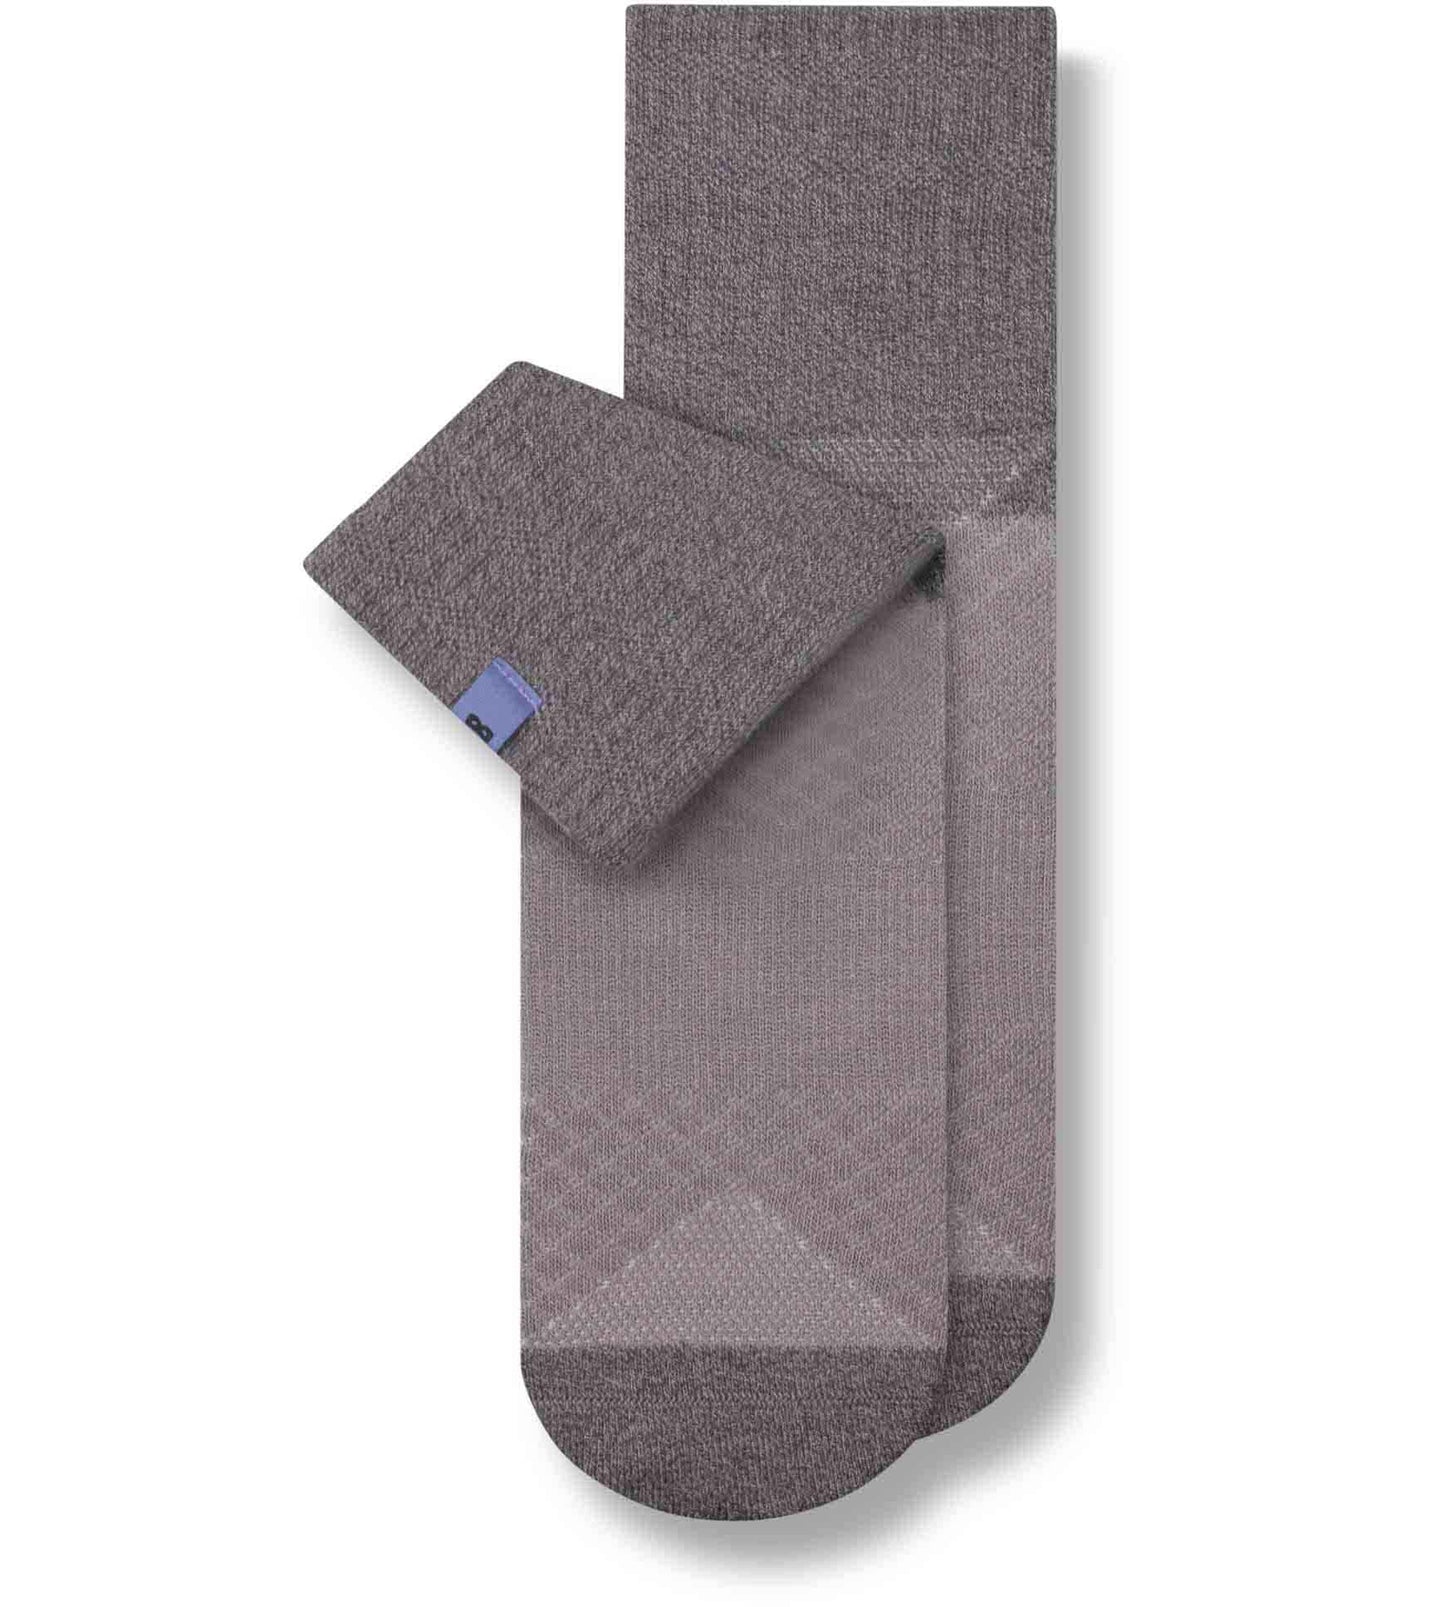 Hustle Cushion Ankle Socks 3 Pack colors contain: Gray, Light Gray, Dark slate gray, Rosy brown, Dim gray, Lavender, Gray, Dark Gray, Dim gray